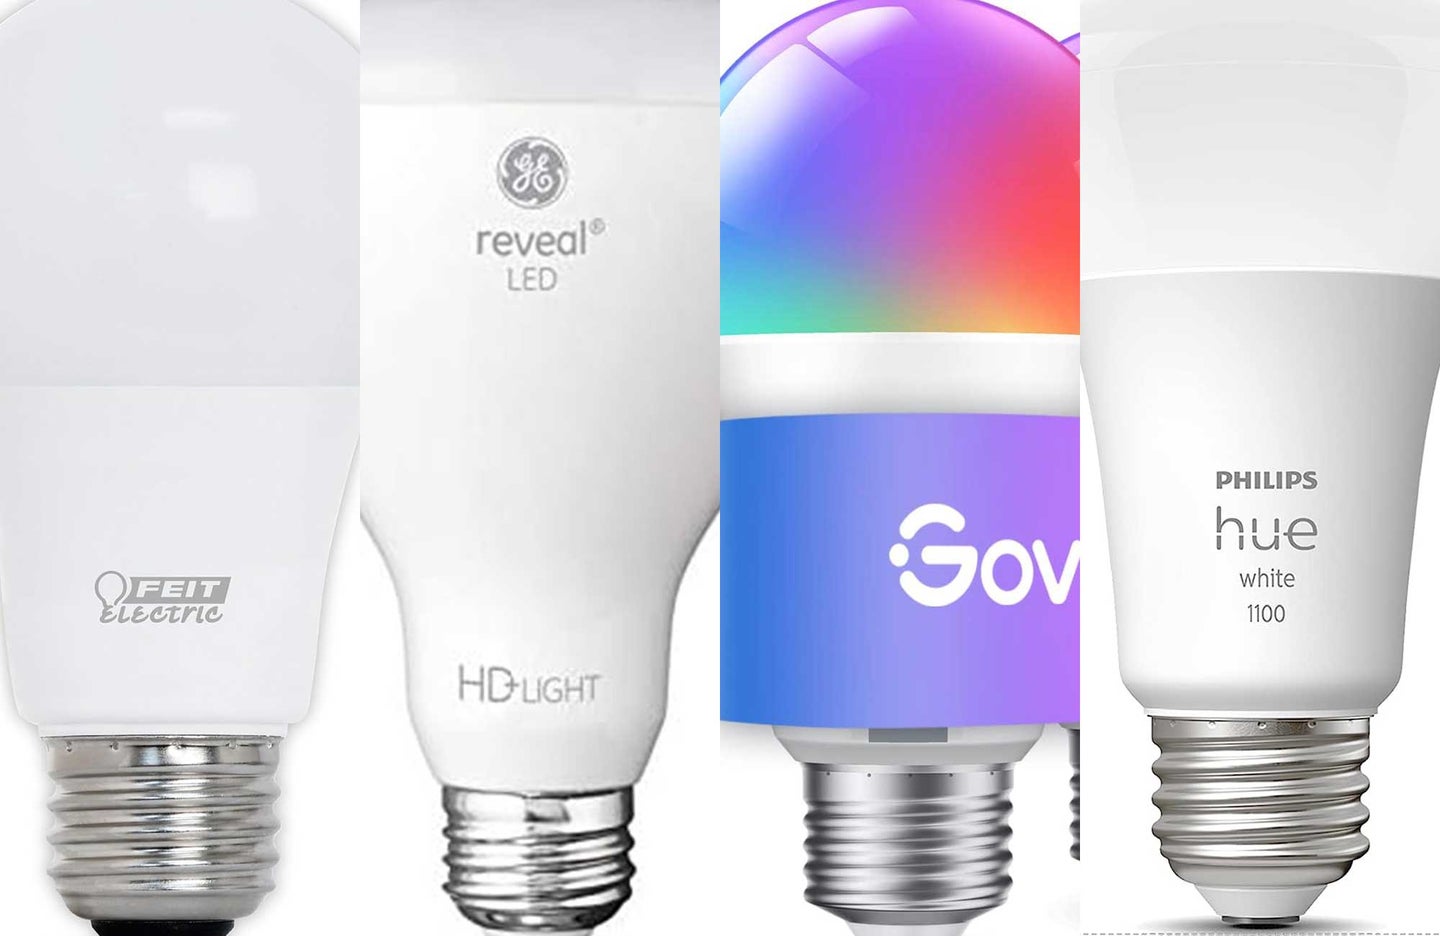 A lineup of the best LED light bulbs in four vertical sections